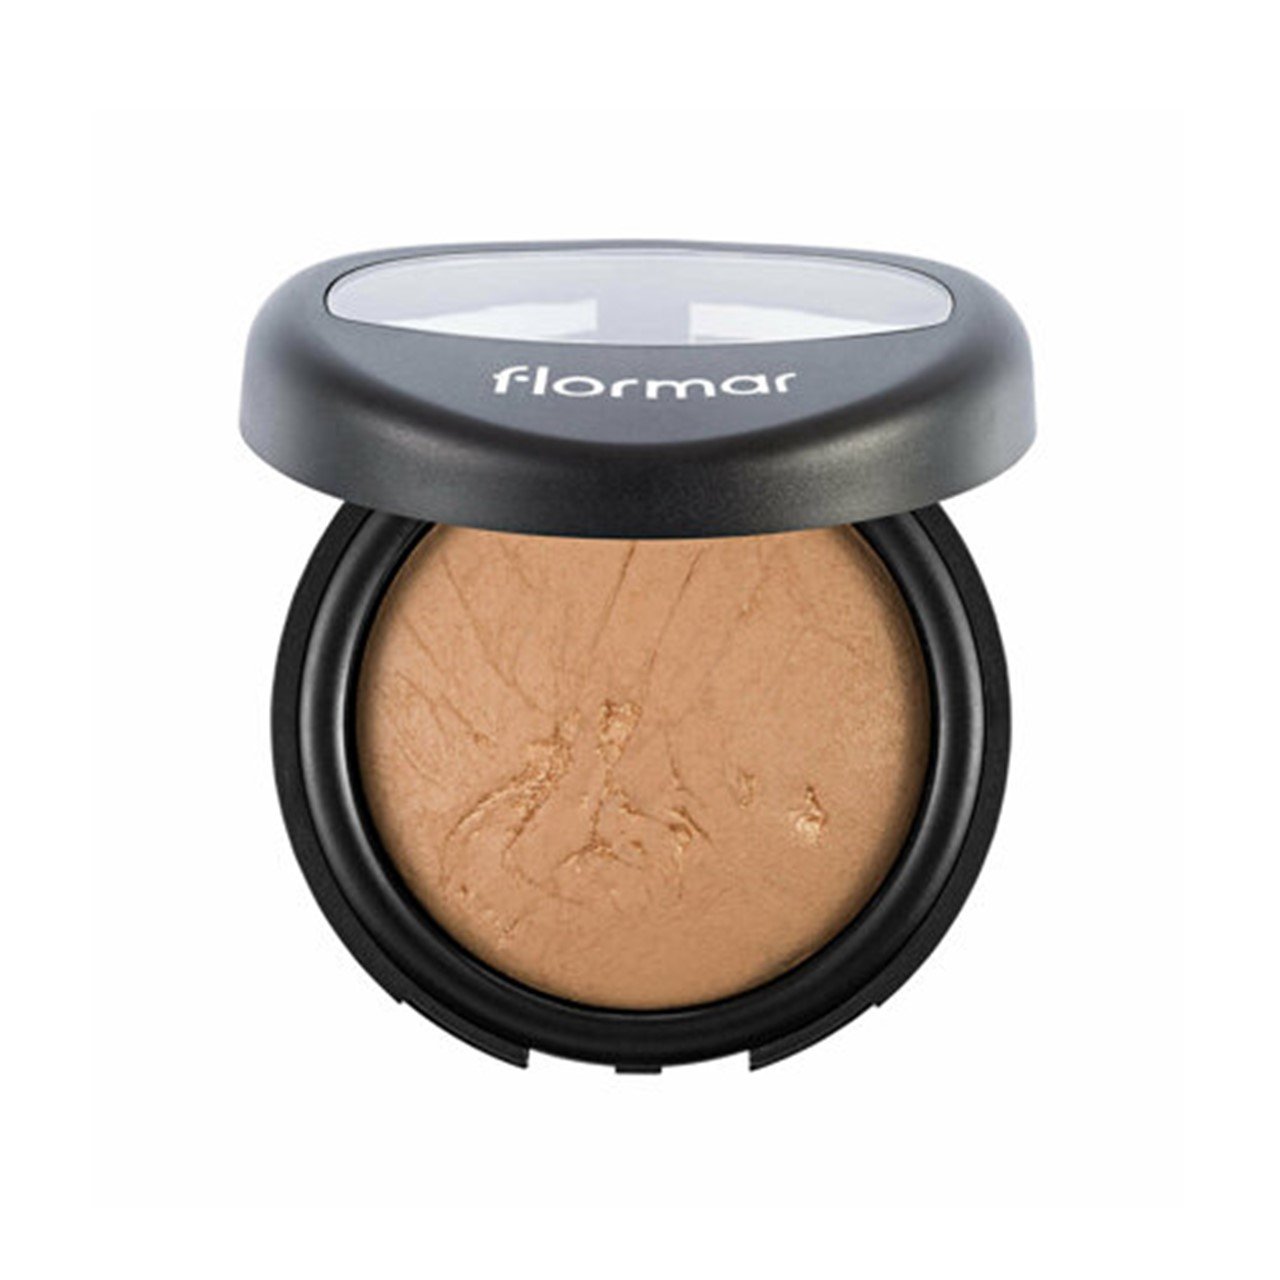 Flormar Baked Powder 21 Beige with Gold 9g